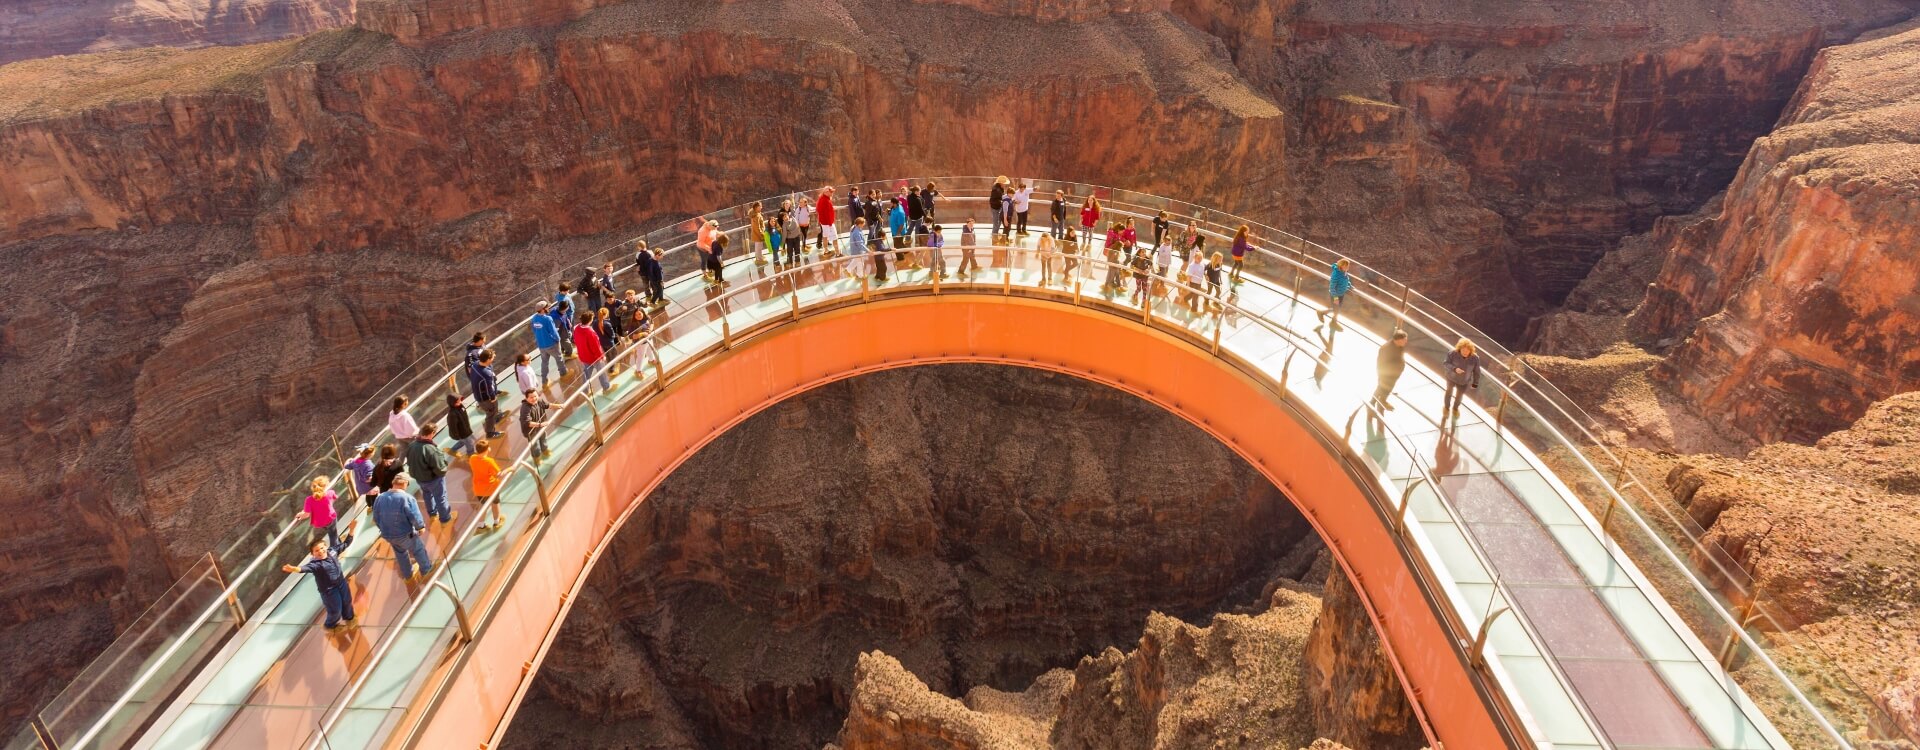 FAQs About The Skywalk and Grand Canyon West